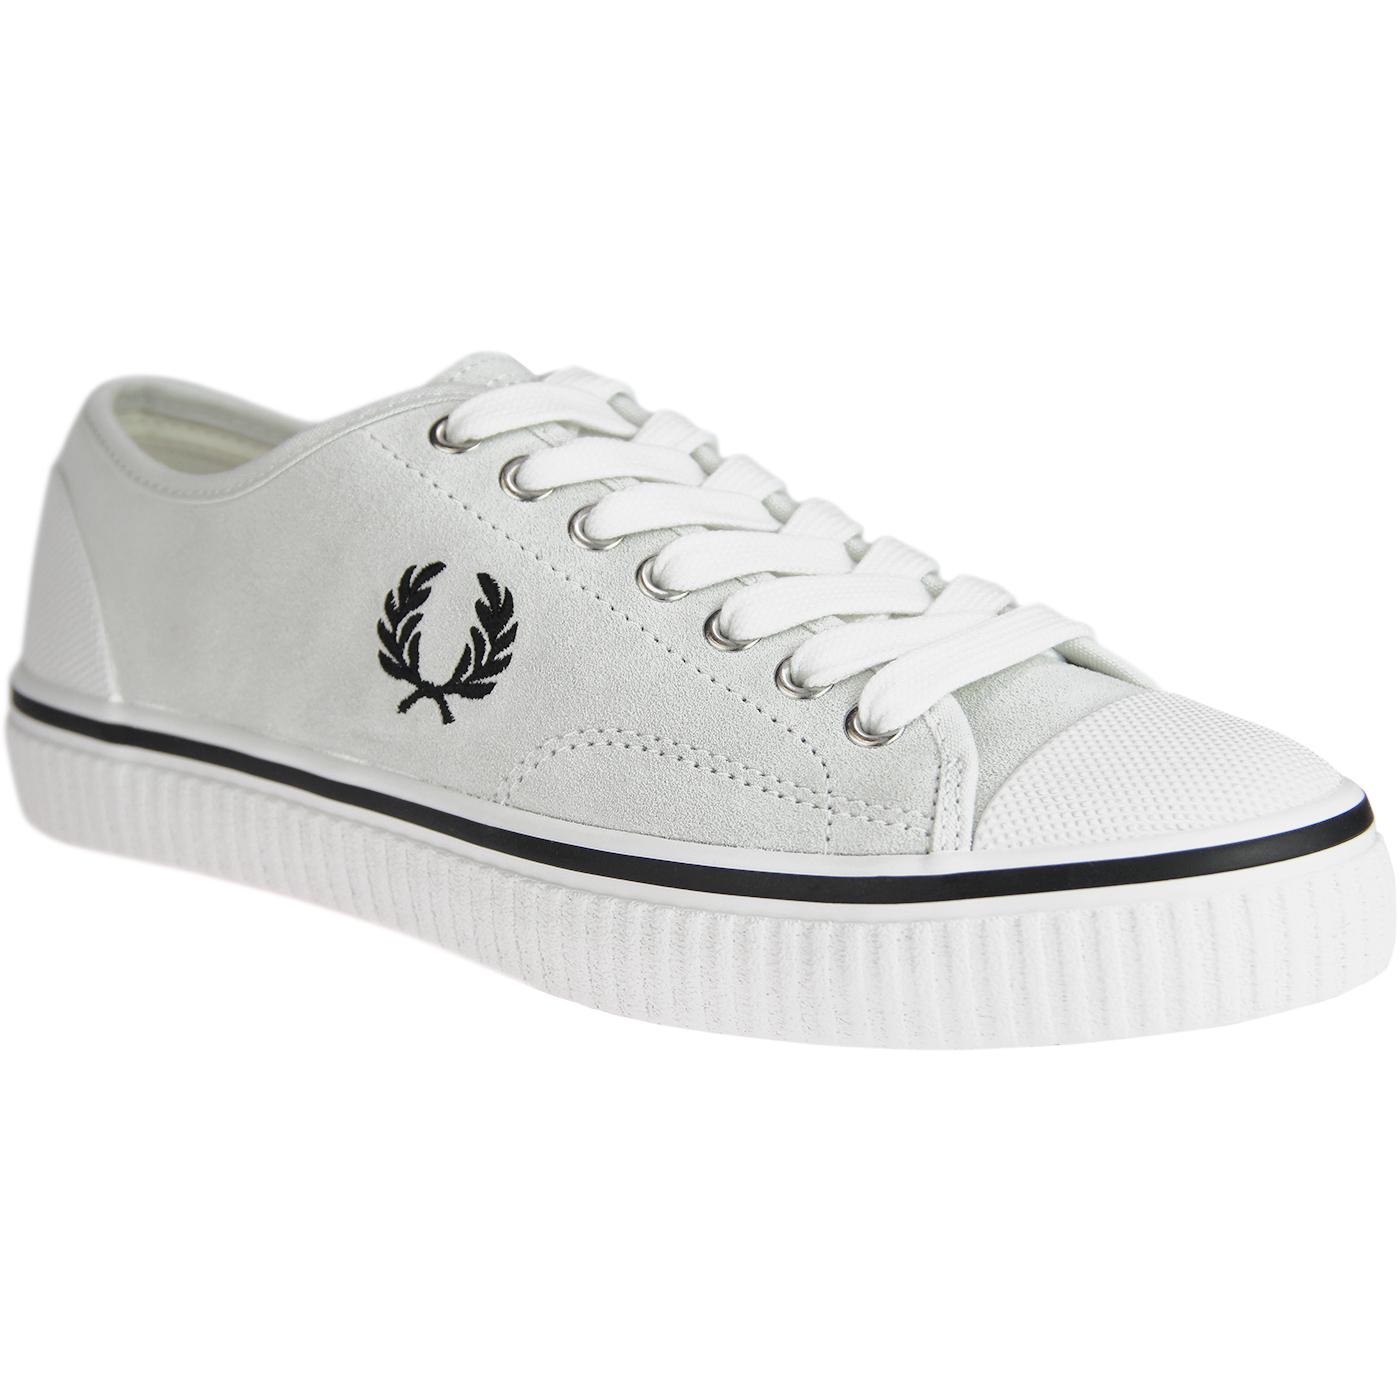 FRED PERRY Hughes Retro Indie Low Suede Trainers in White